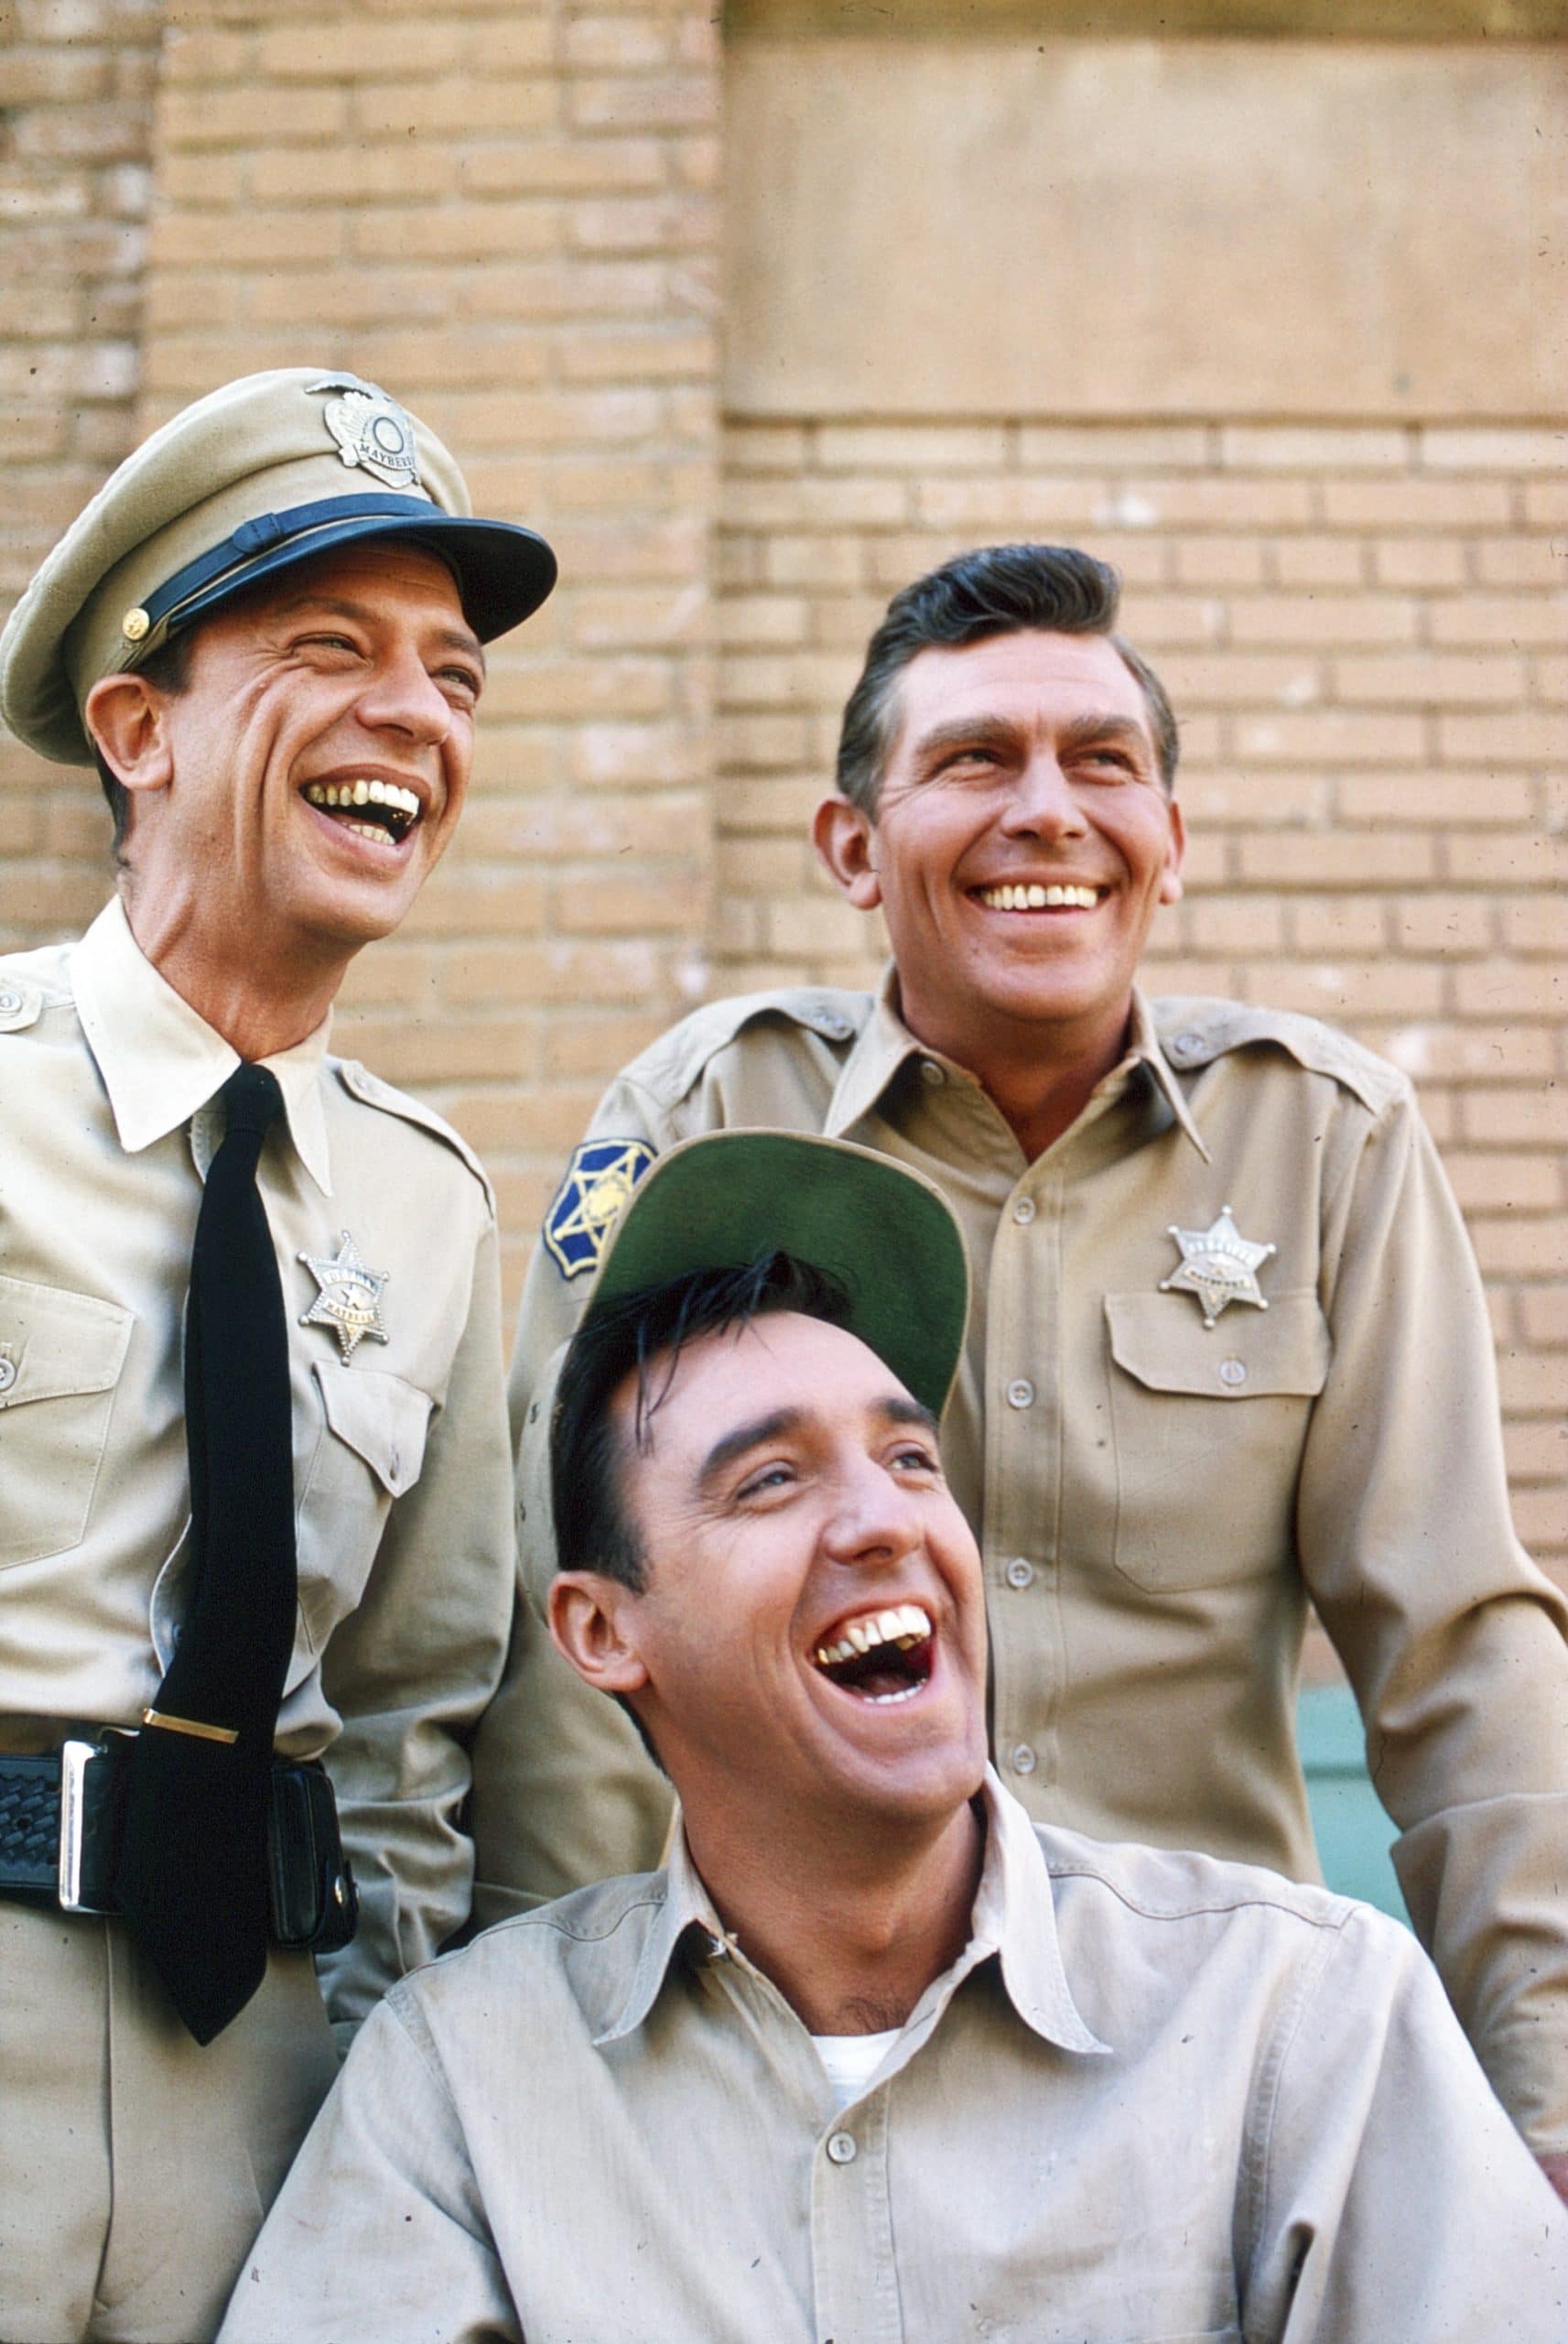 THE ANDY GRIFFITH SHOW, from left: Don Knotts, Jim Nabors, Andy Griffith, 1964